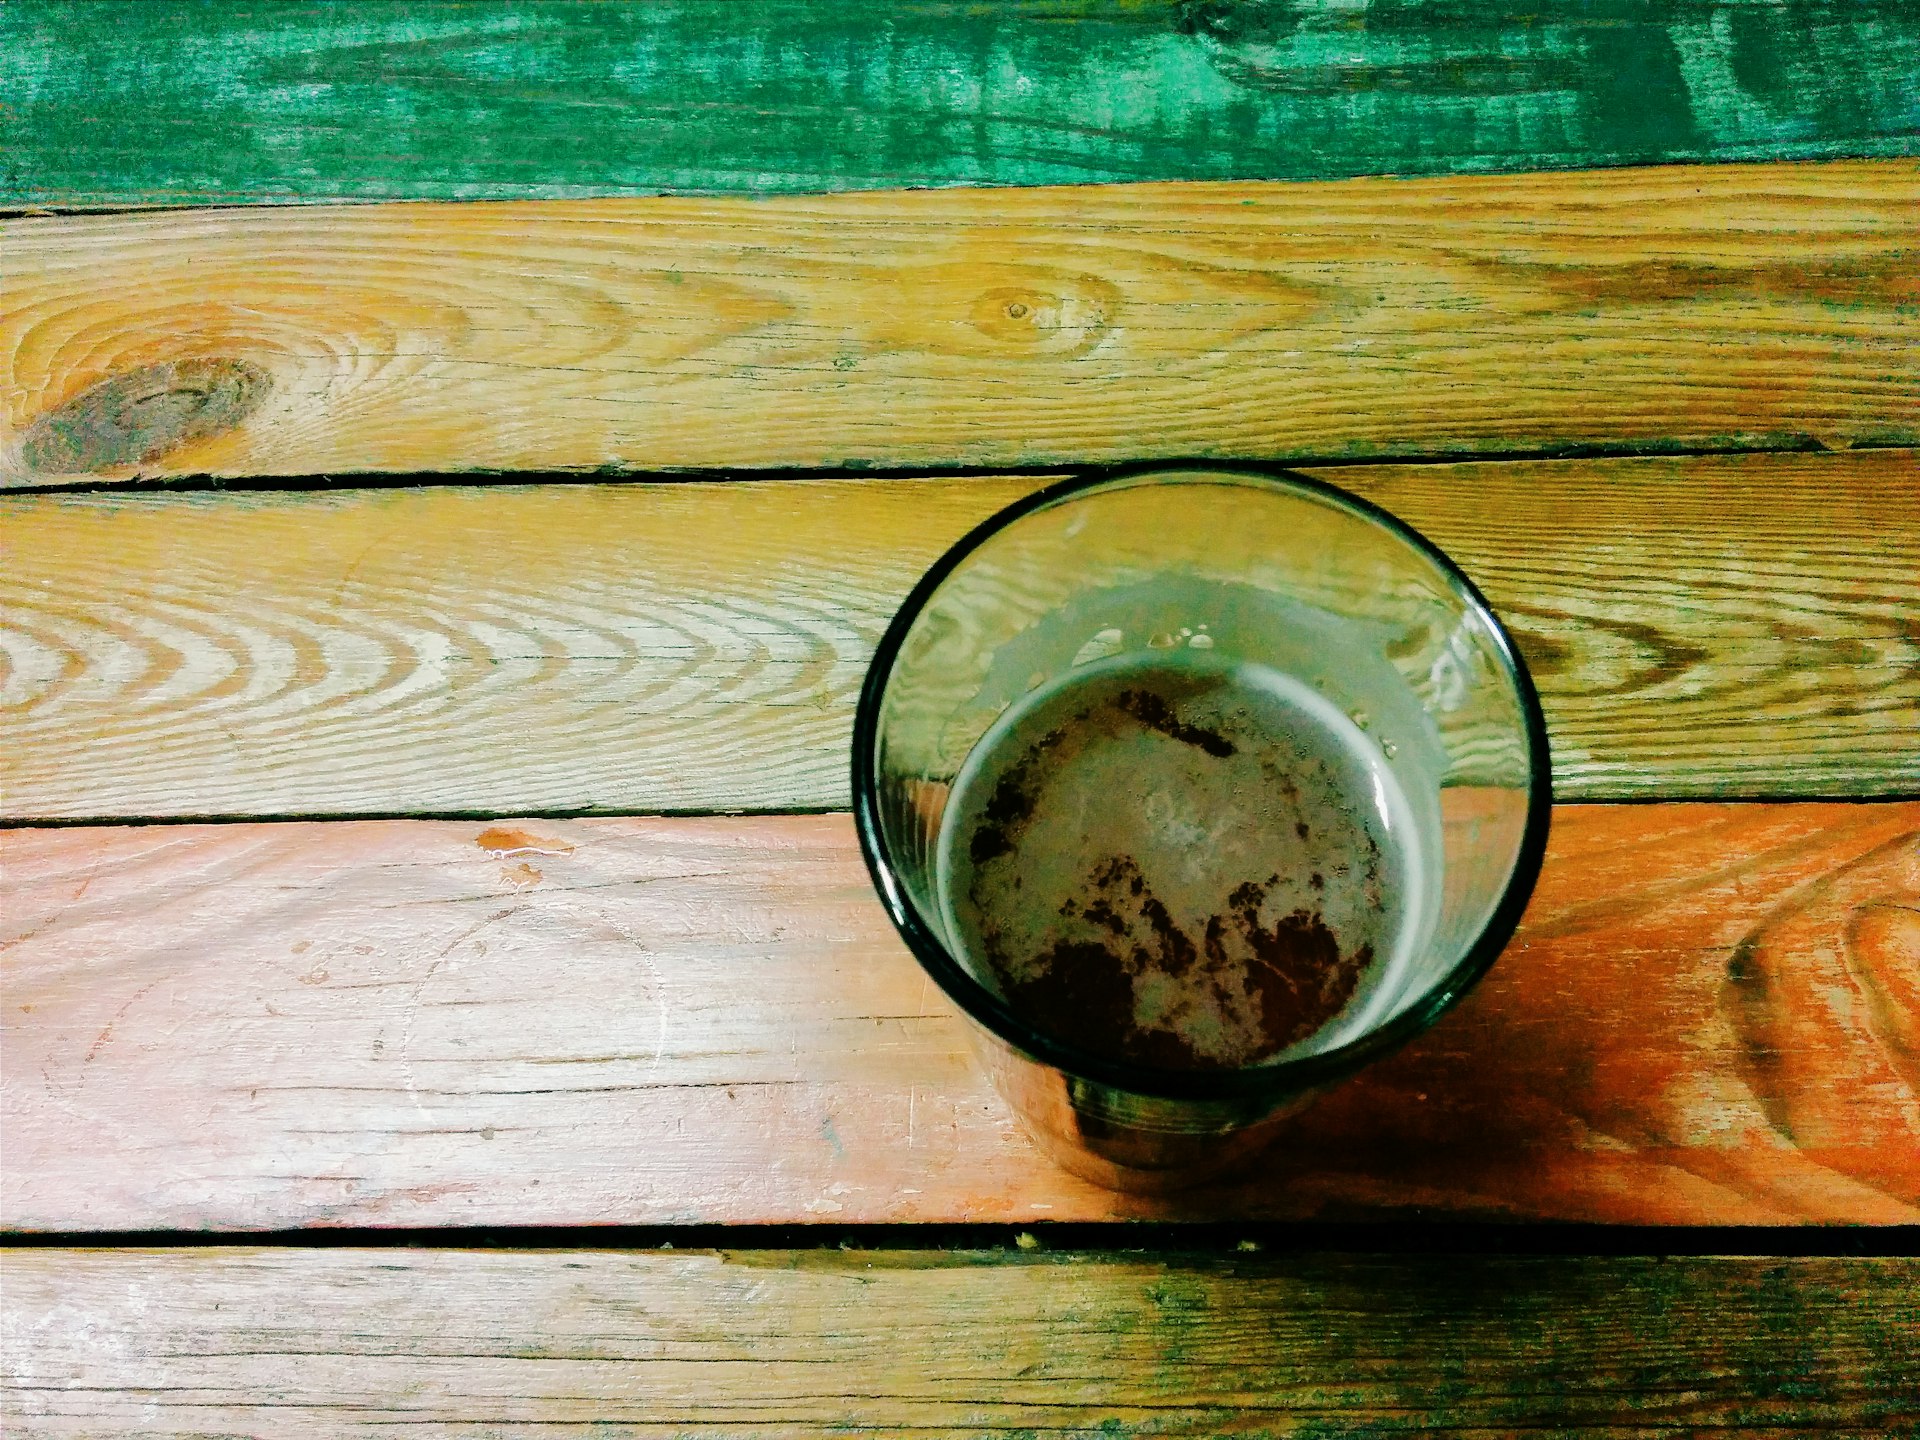 Glass Of Beer On Colorful Wooden Table